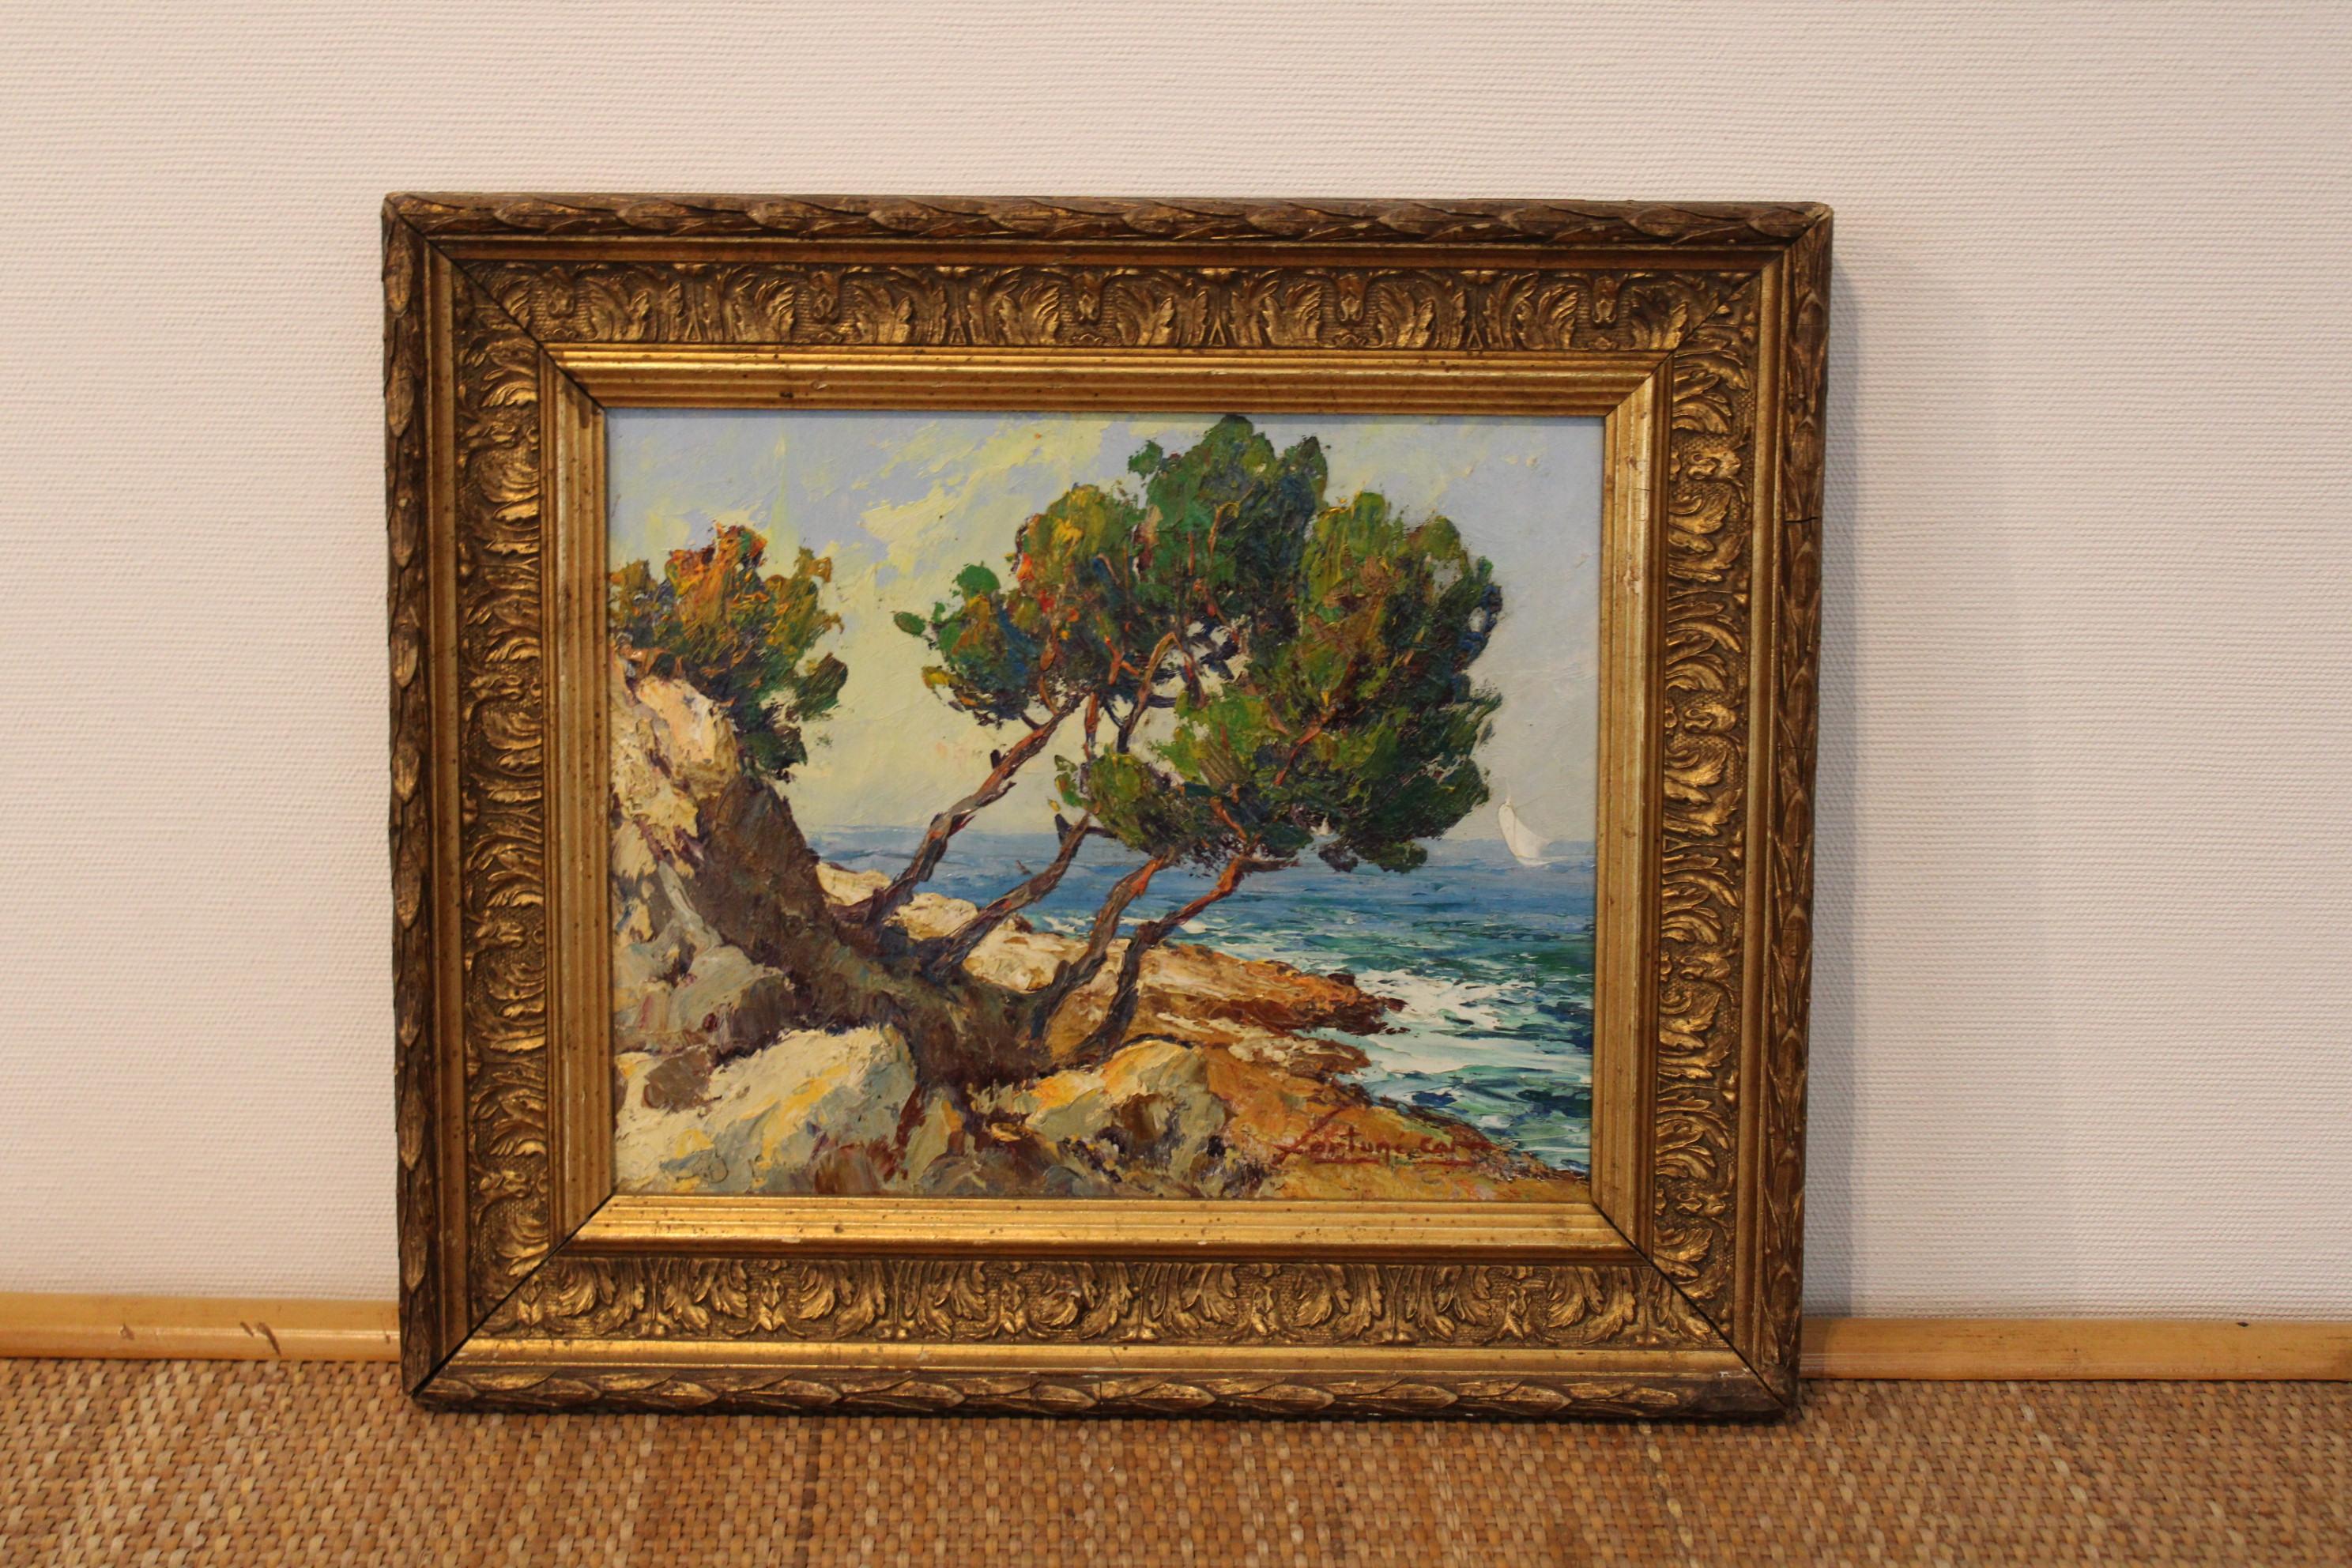 Landscape painting by the French painter Fortune Car (1905-1970)

Frame dimensions : 36 x 31 cm
Painting dimensions : 22 x 27 cm